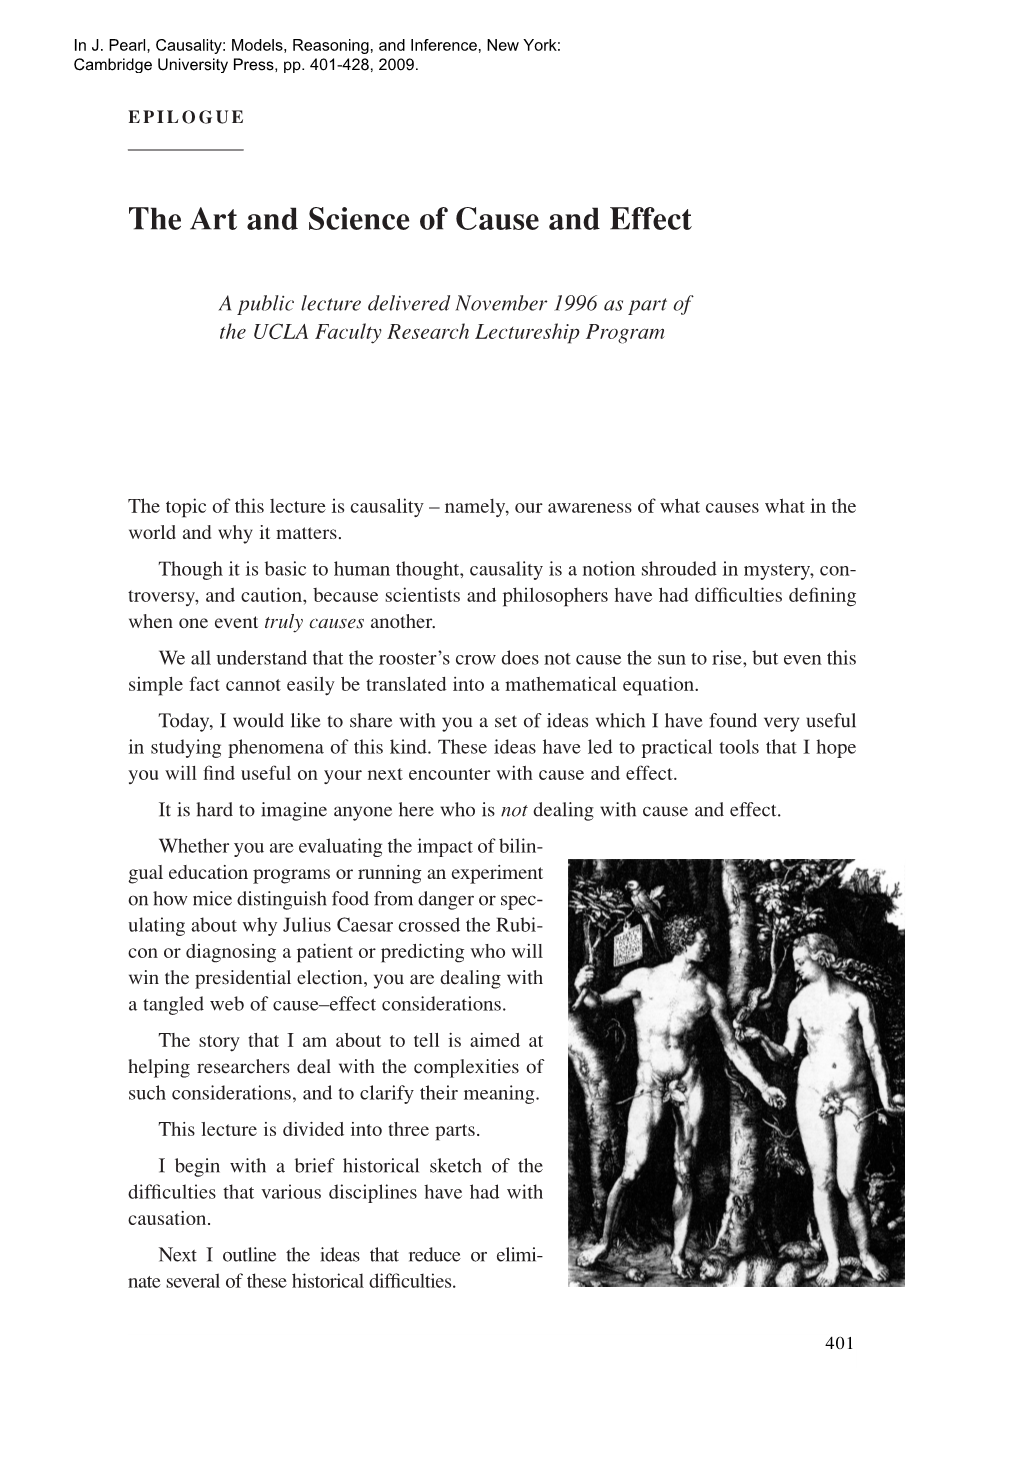 Epilogue: the Art and Science of Cause and Effect (From Causality, 2Nd Edition)